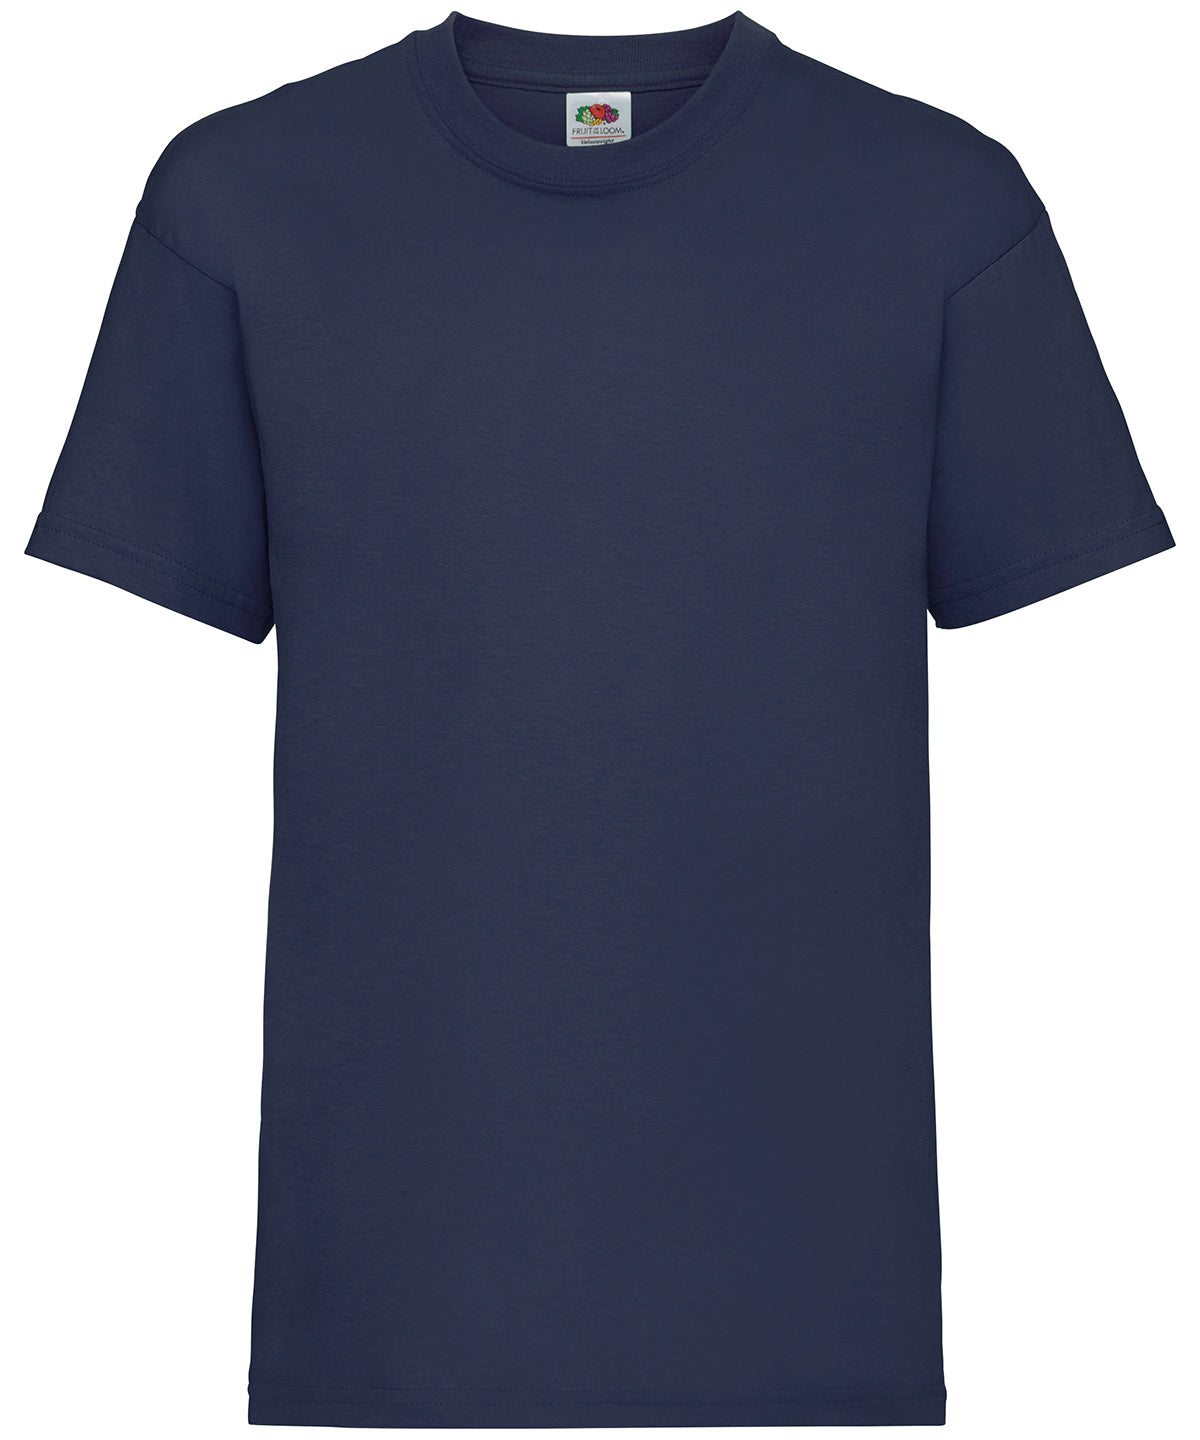 Fruit of the Loom Kids valueweight T Navy